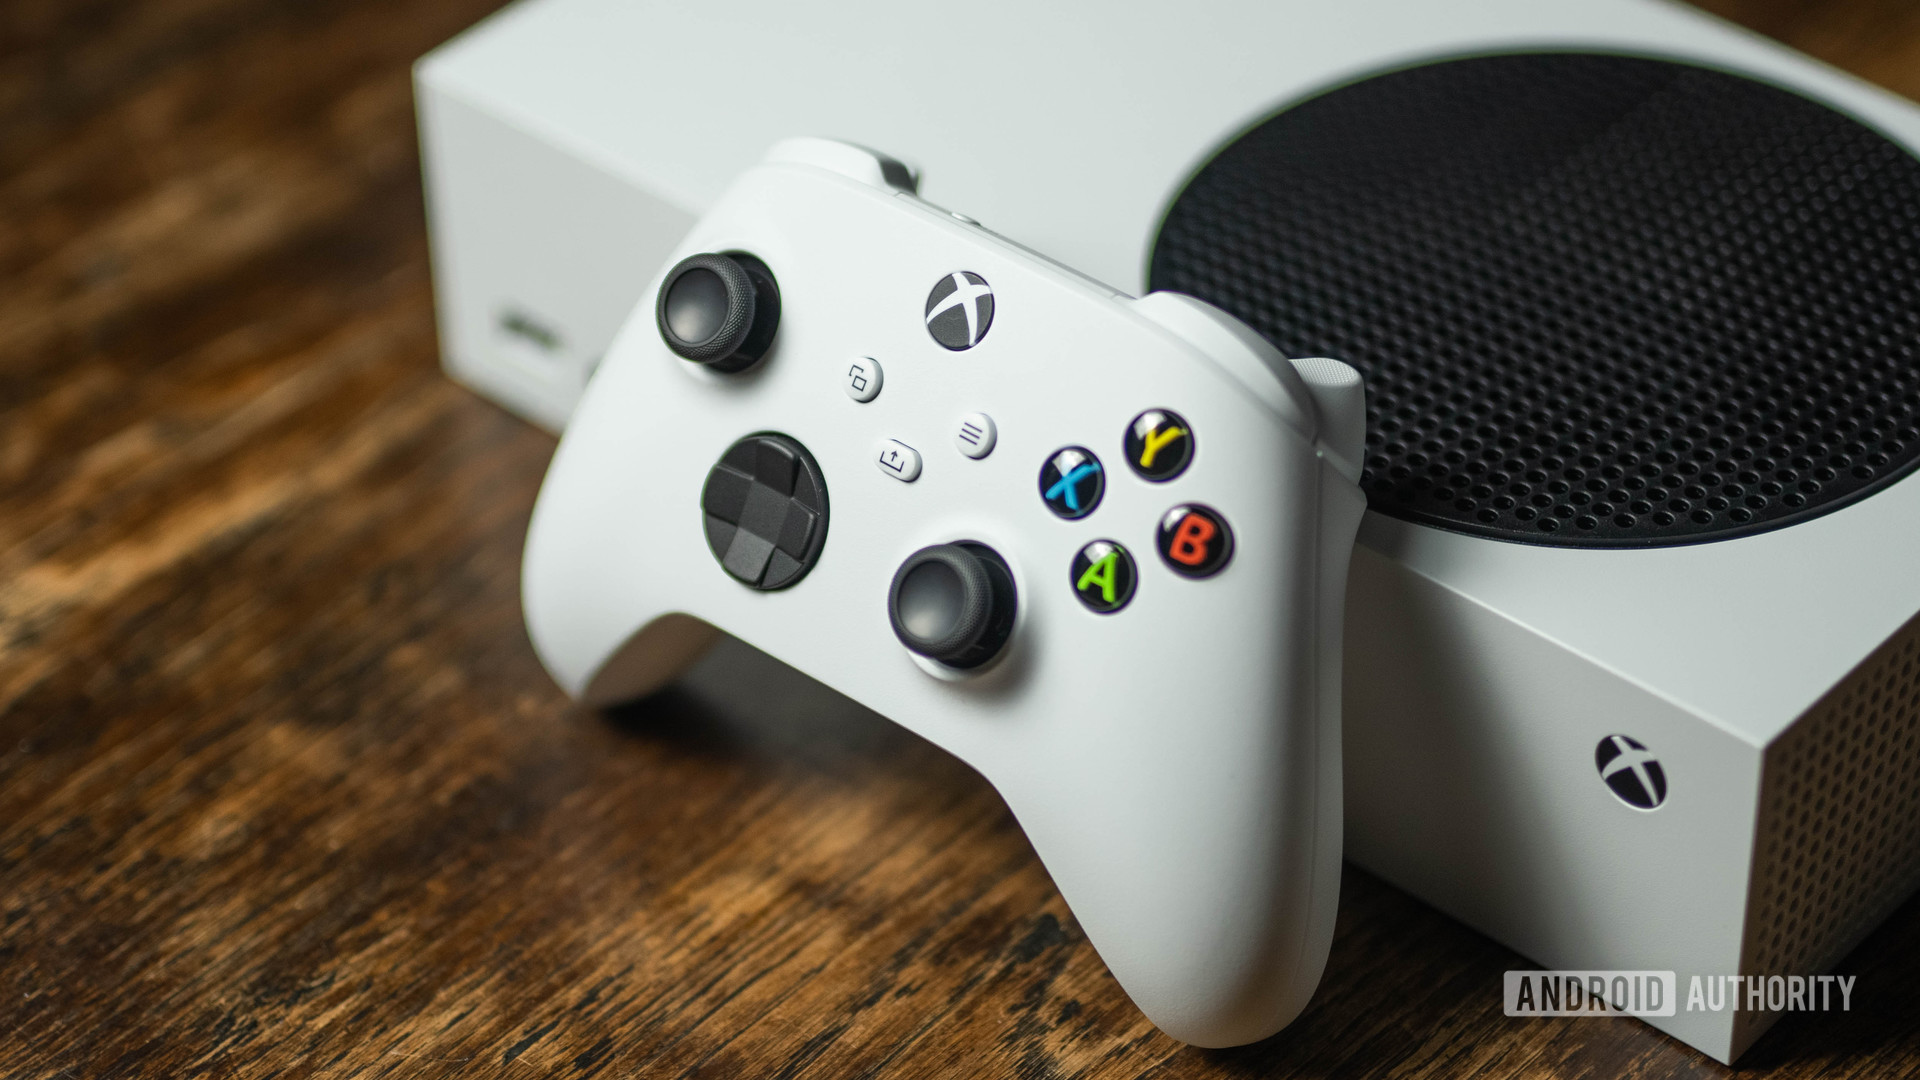 Xbox Series X/S stock: where to buy Microsoft's new console